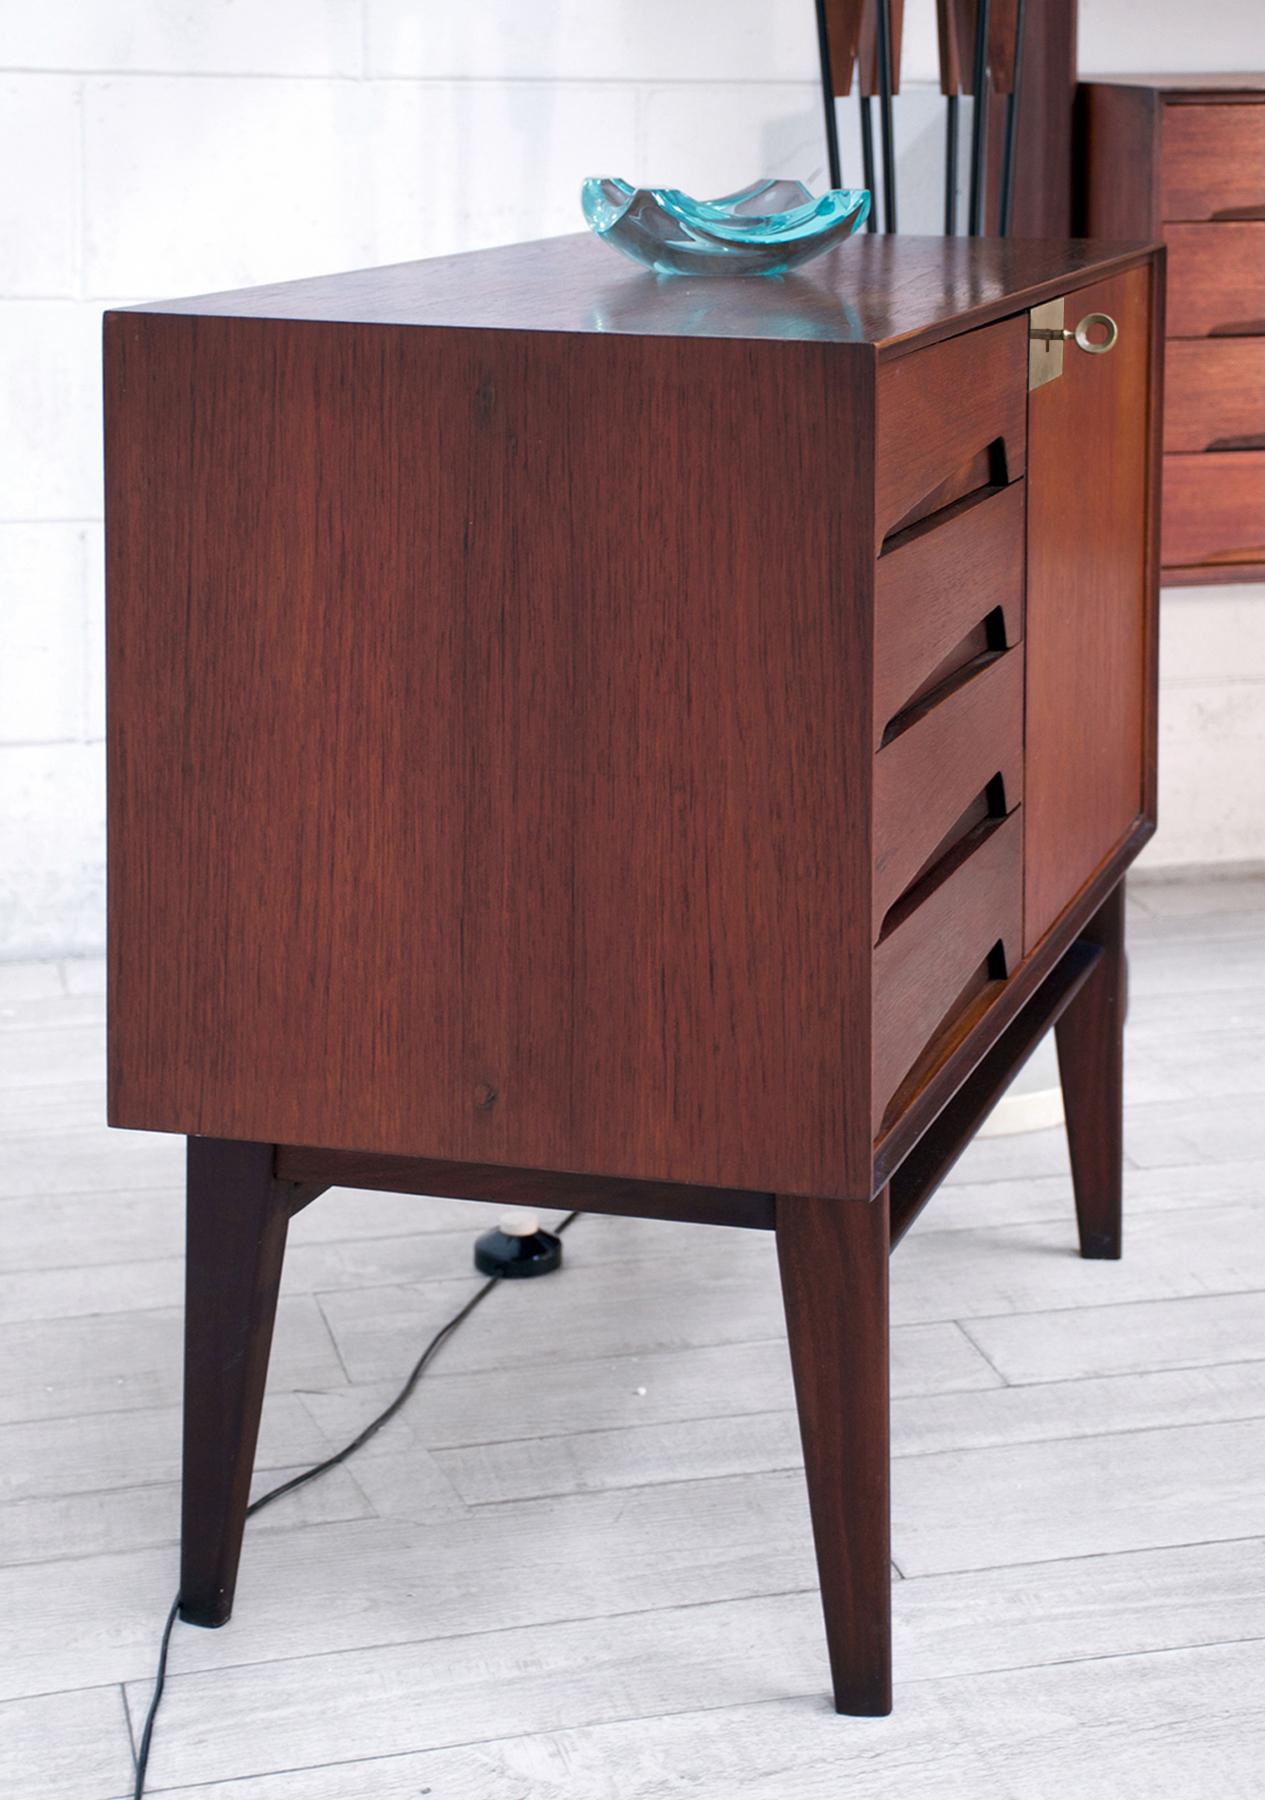 Mid-20th Century Italian Mid-Century Teak Wood Sideboard with Drawers by Vittorio Dassi, 1950s